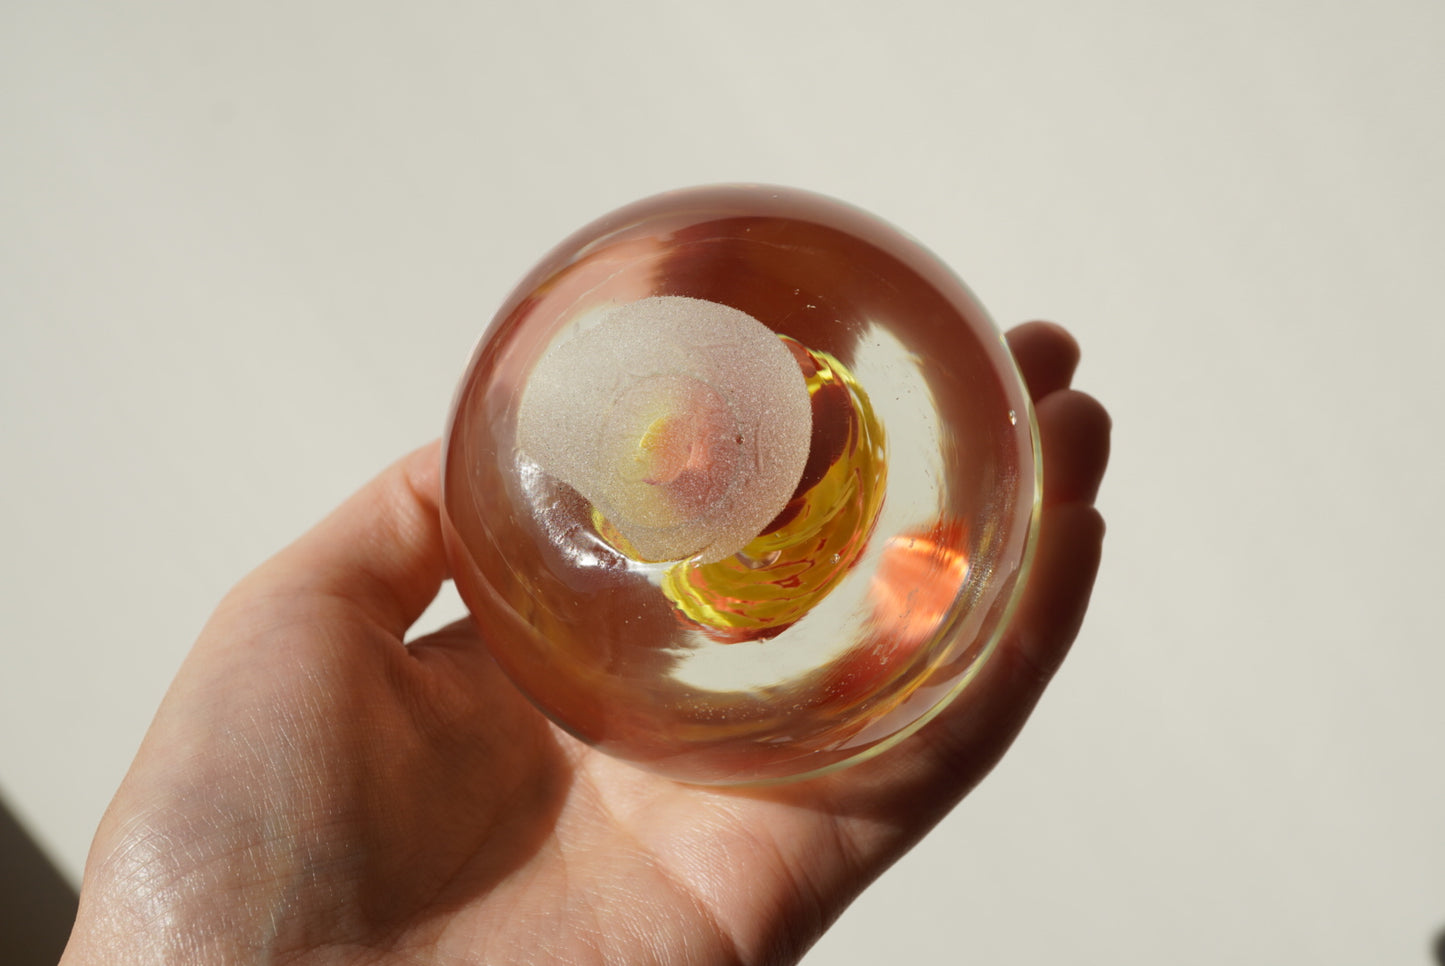 Paperweight Art of Yellow & Red